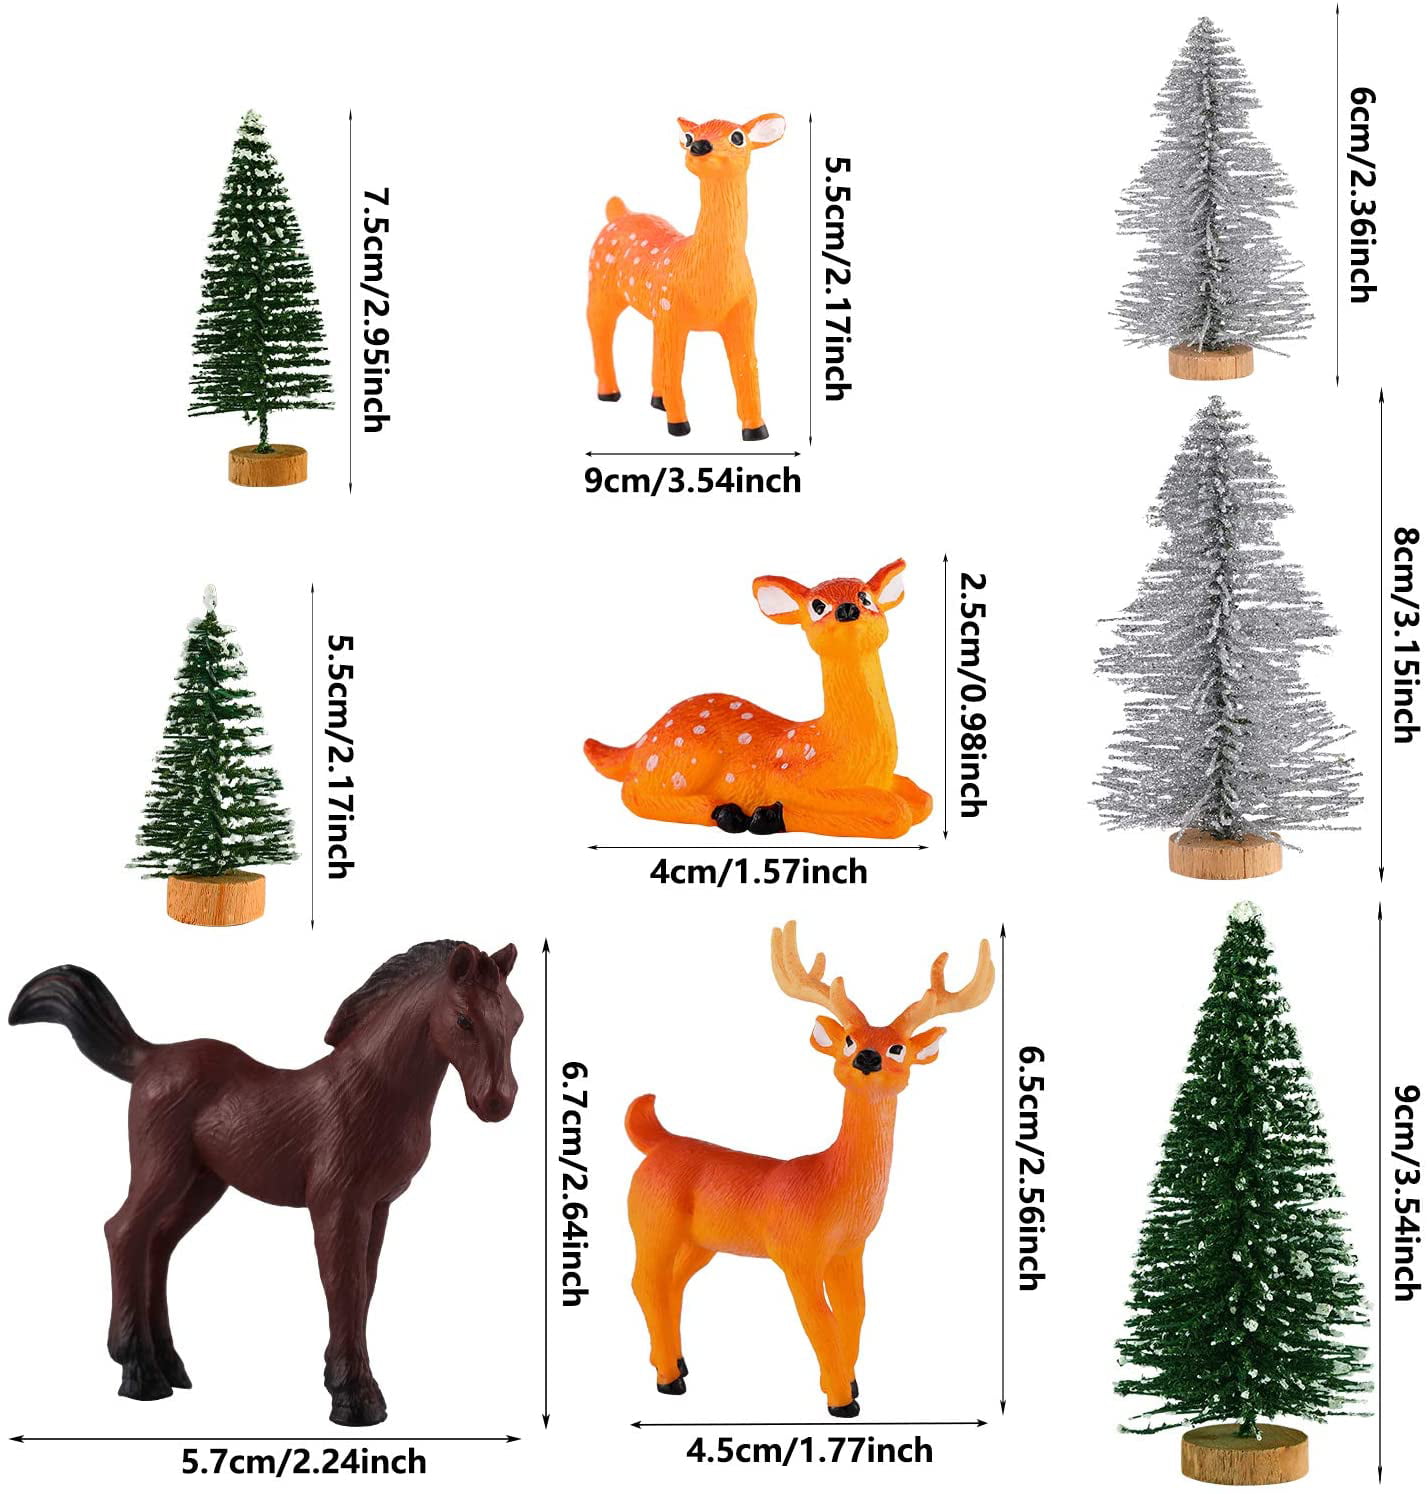 18 Piece Woodland Animals Figurines Woodland Creatures Figurines Realistic Plastic Wild Forest Animals Figurines Includes 13 Piece Different Animals and 5 Piece Trees for Birthday Christmas Party 